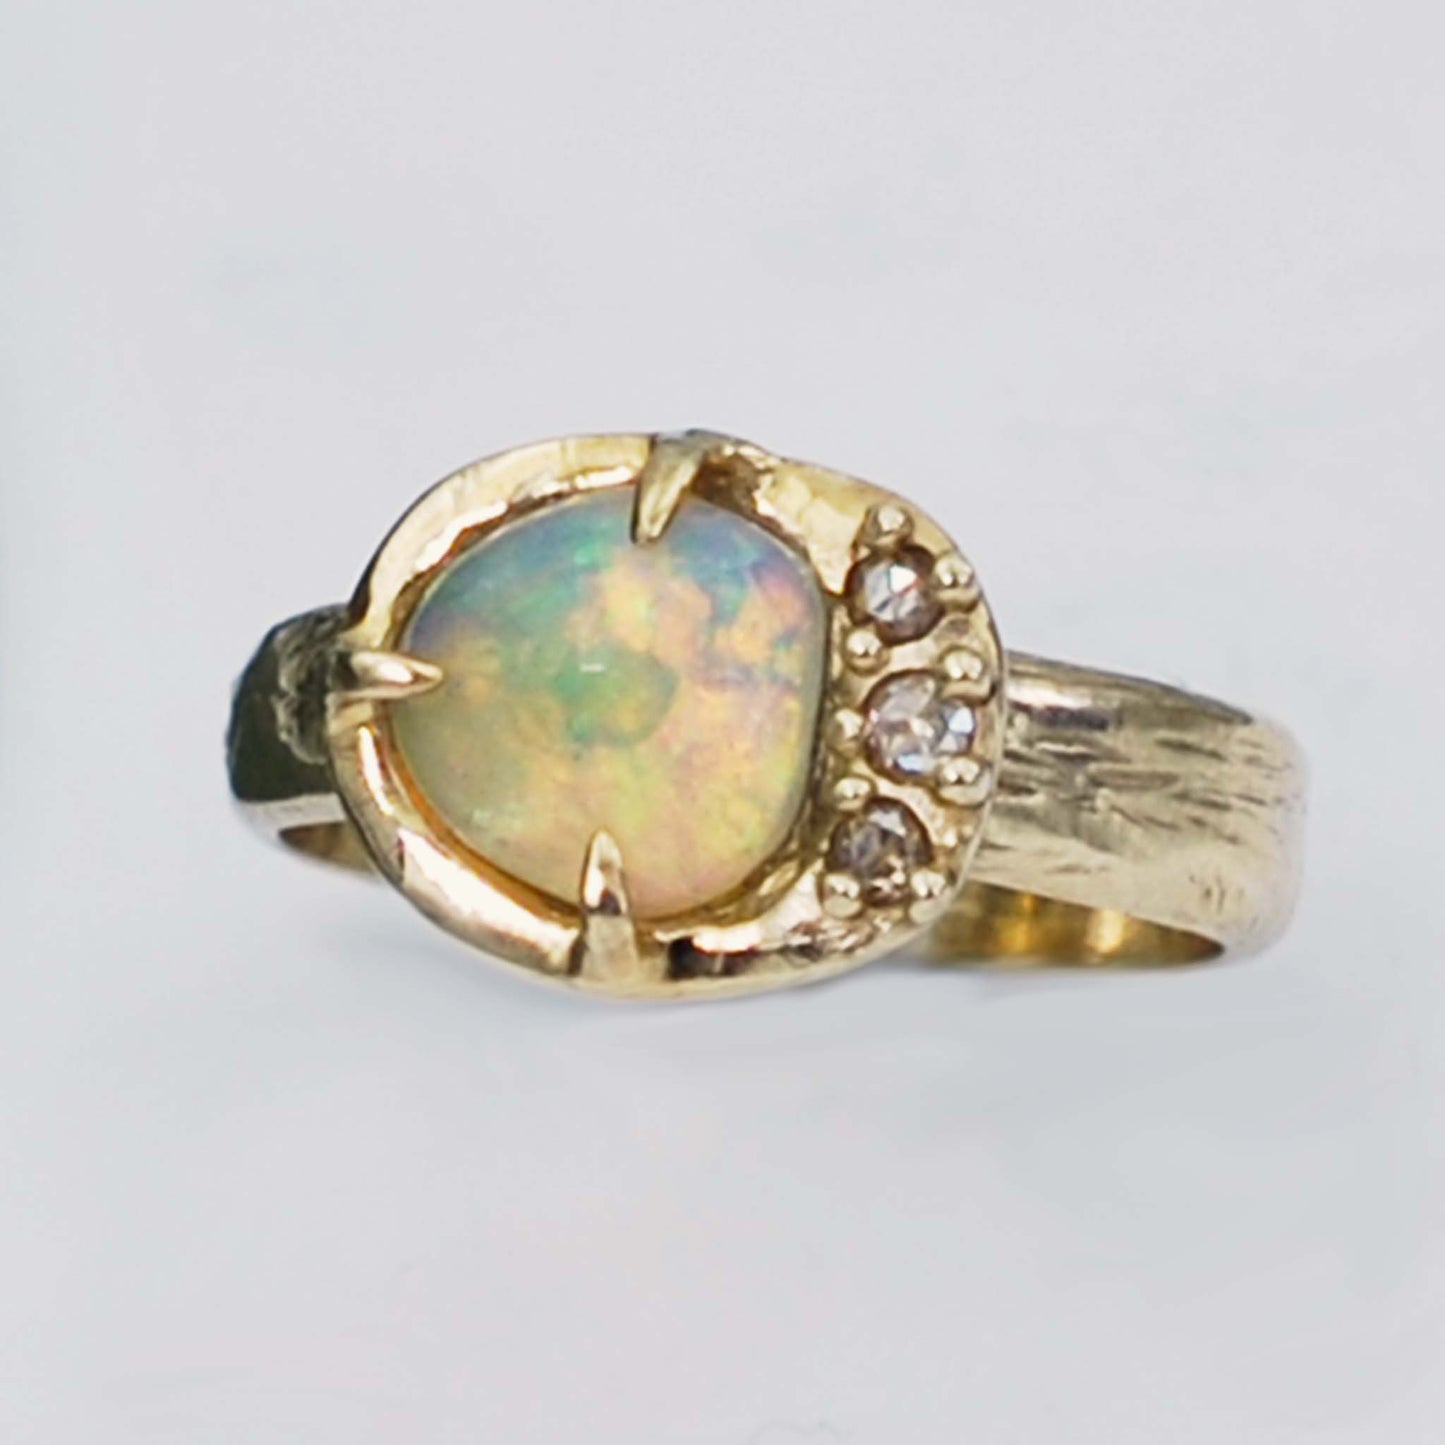 Opal and Diamond Cocktail Ring with Scratched Band